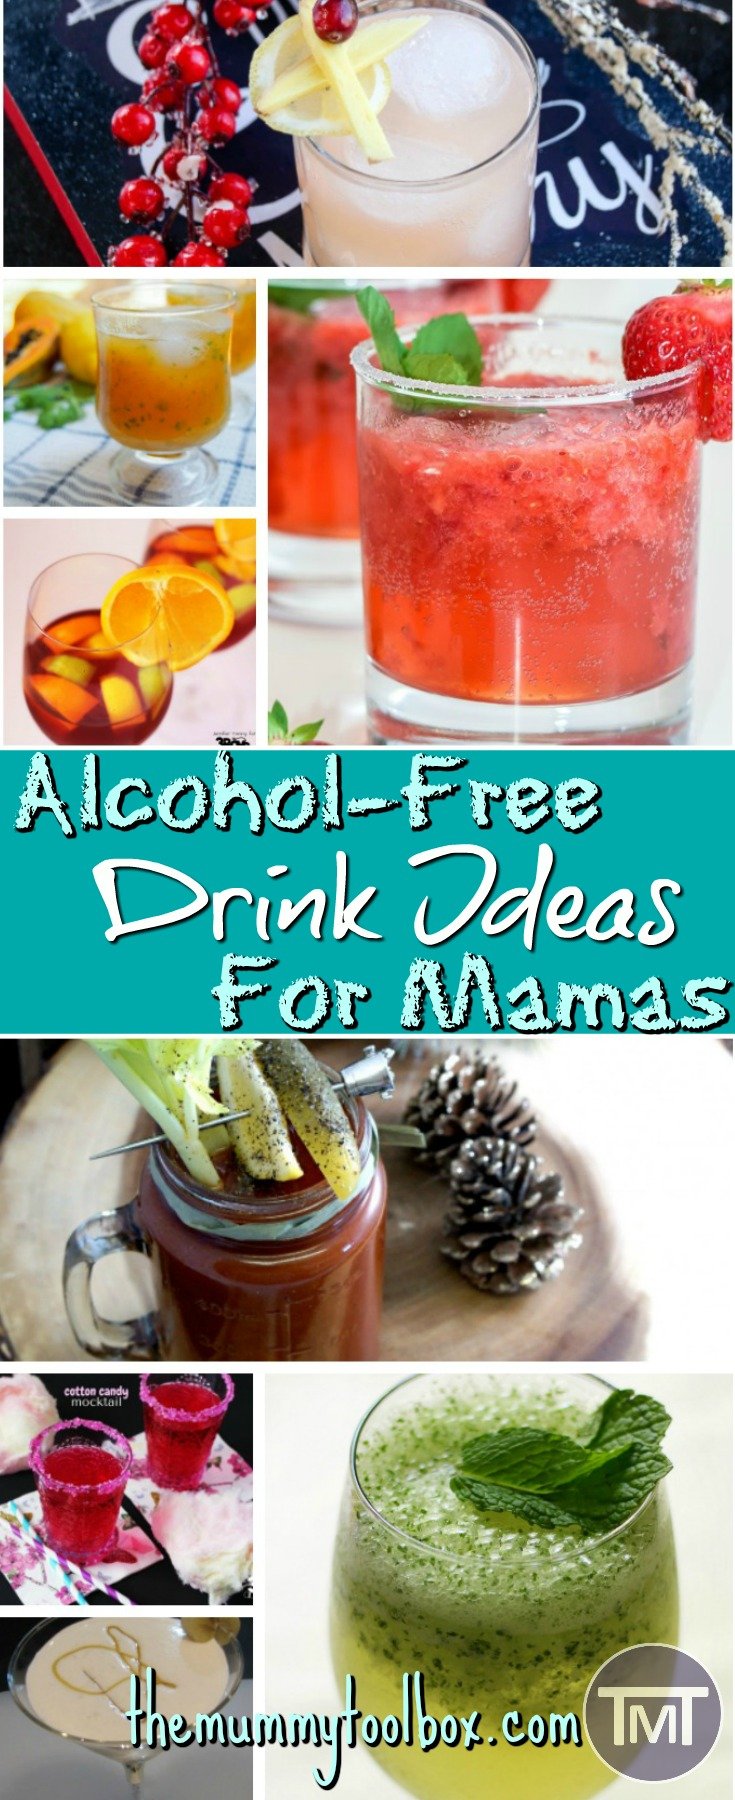 alcohol-free drink ideas for mamas